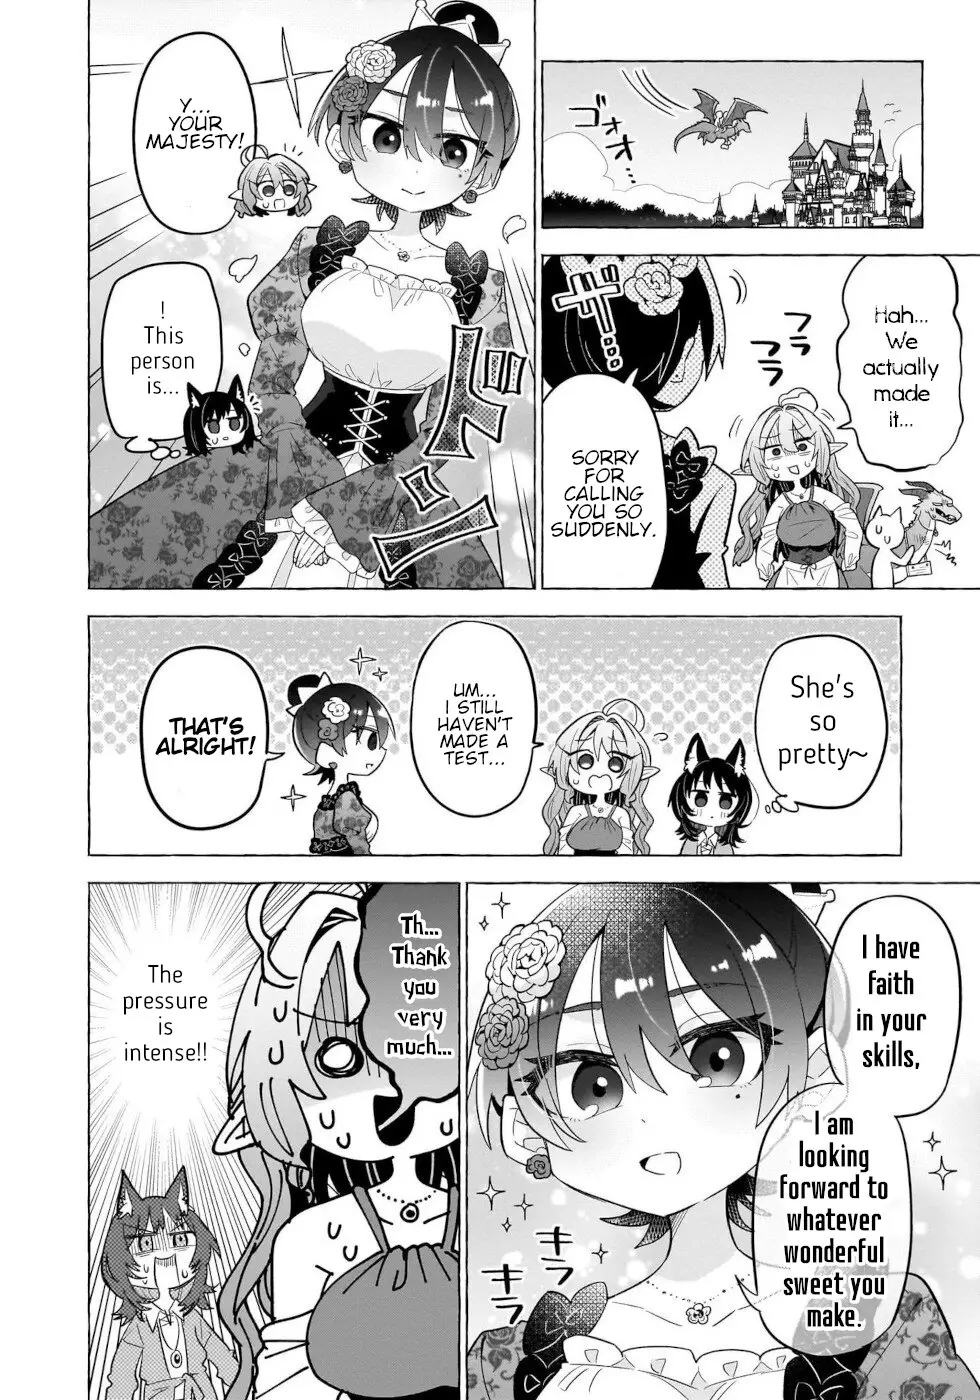 Sweets, Elf, And A High School Girl - 5 page 12-85b7b4cc